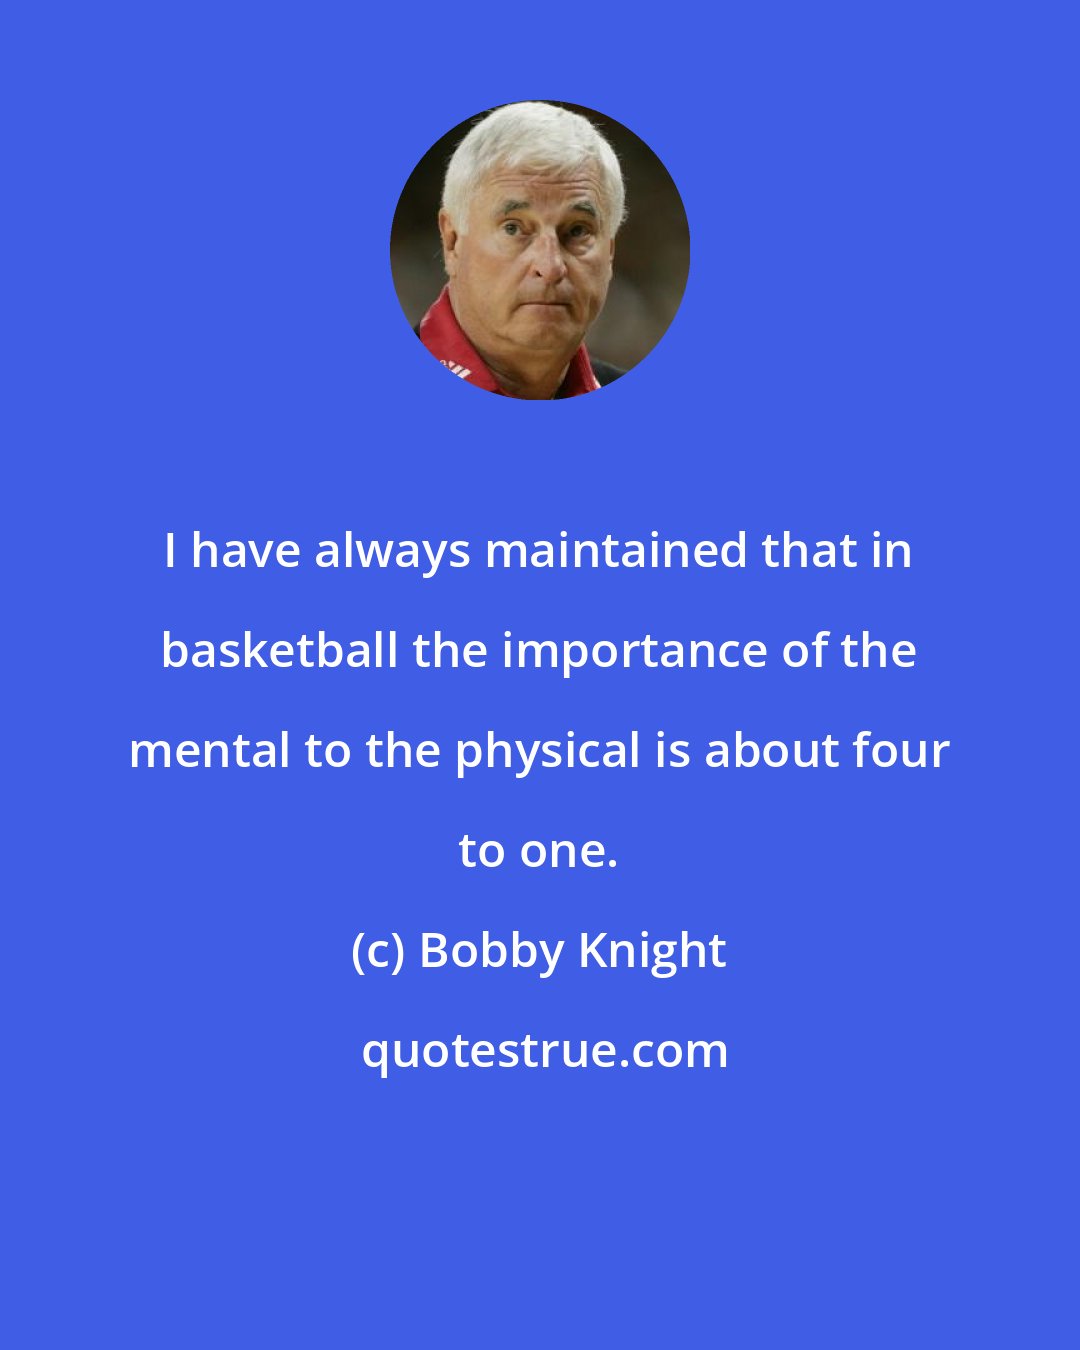 Bobby Knight: I have always maintained that in basketball the importance of the mental to the physical is about four to one.